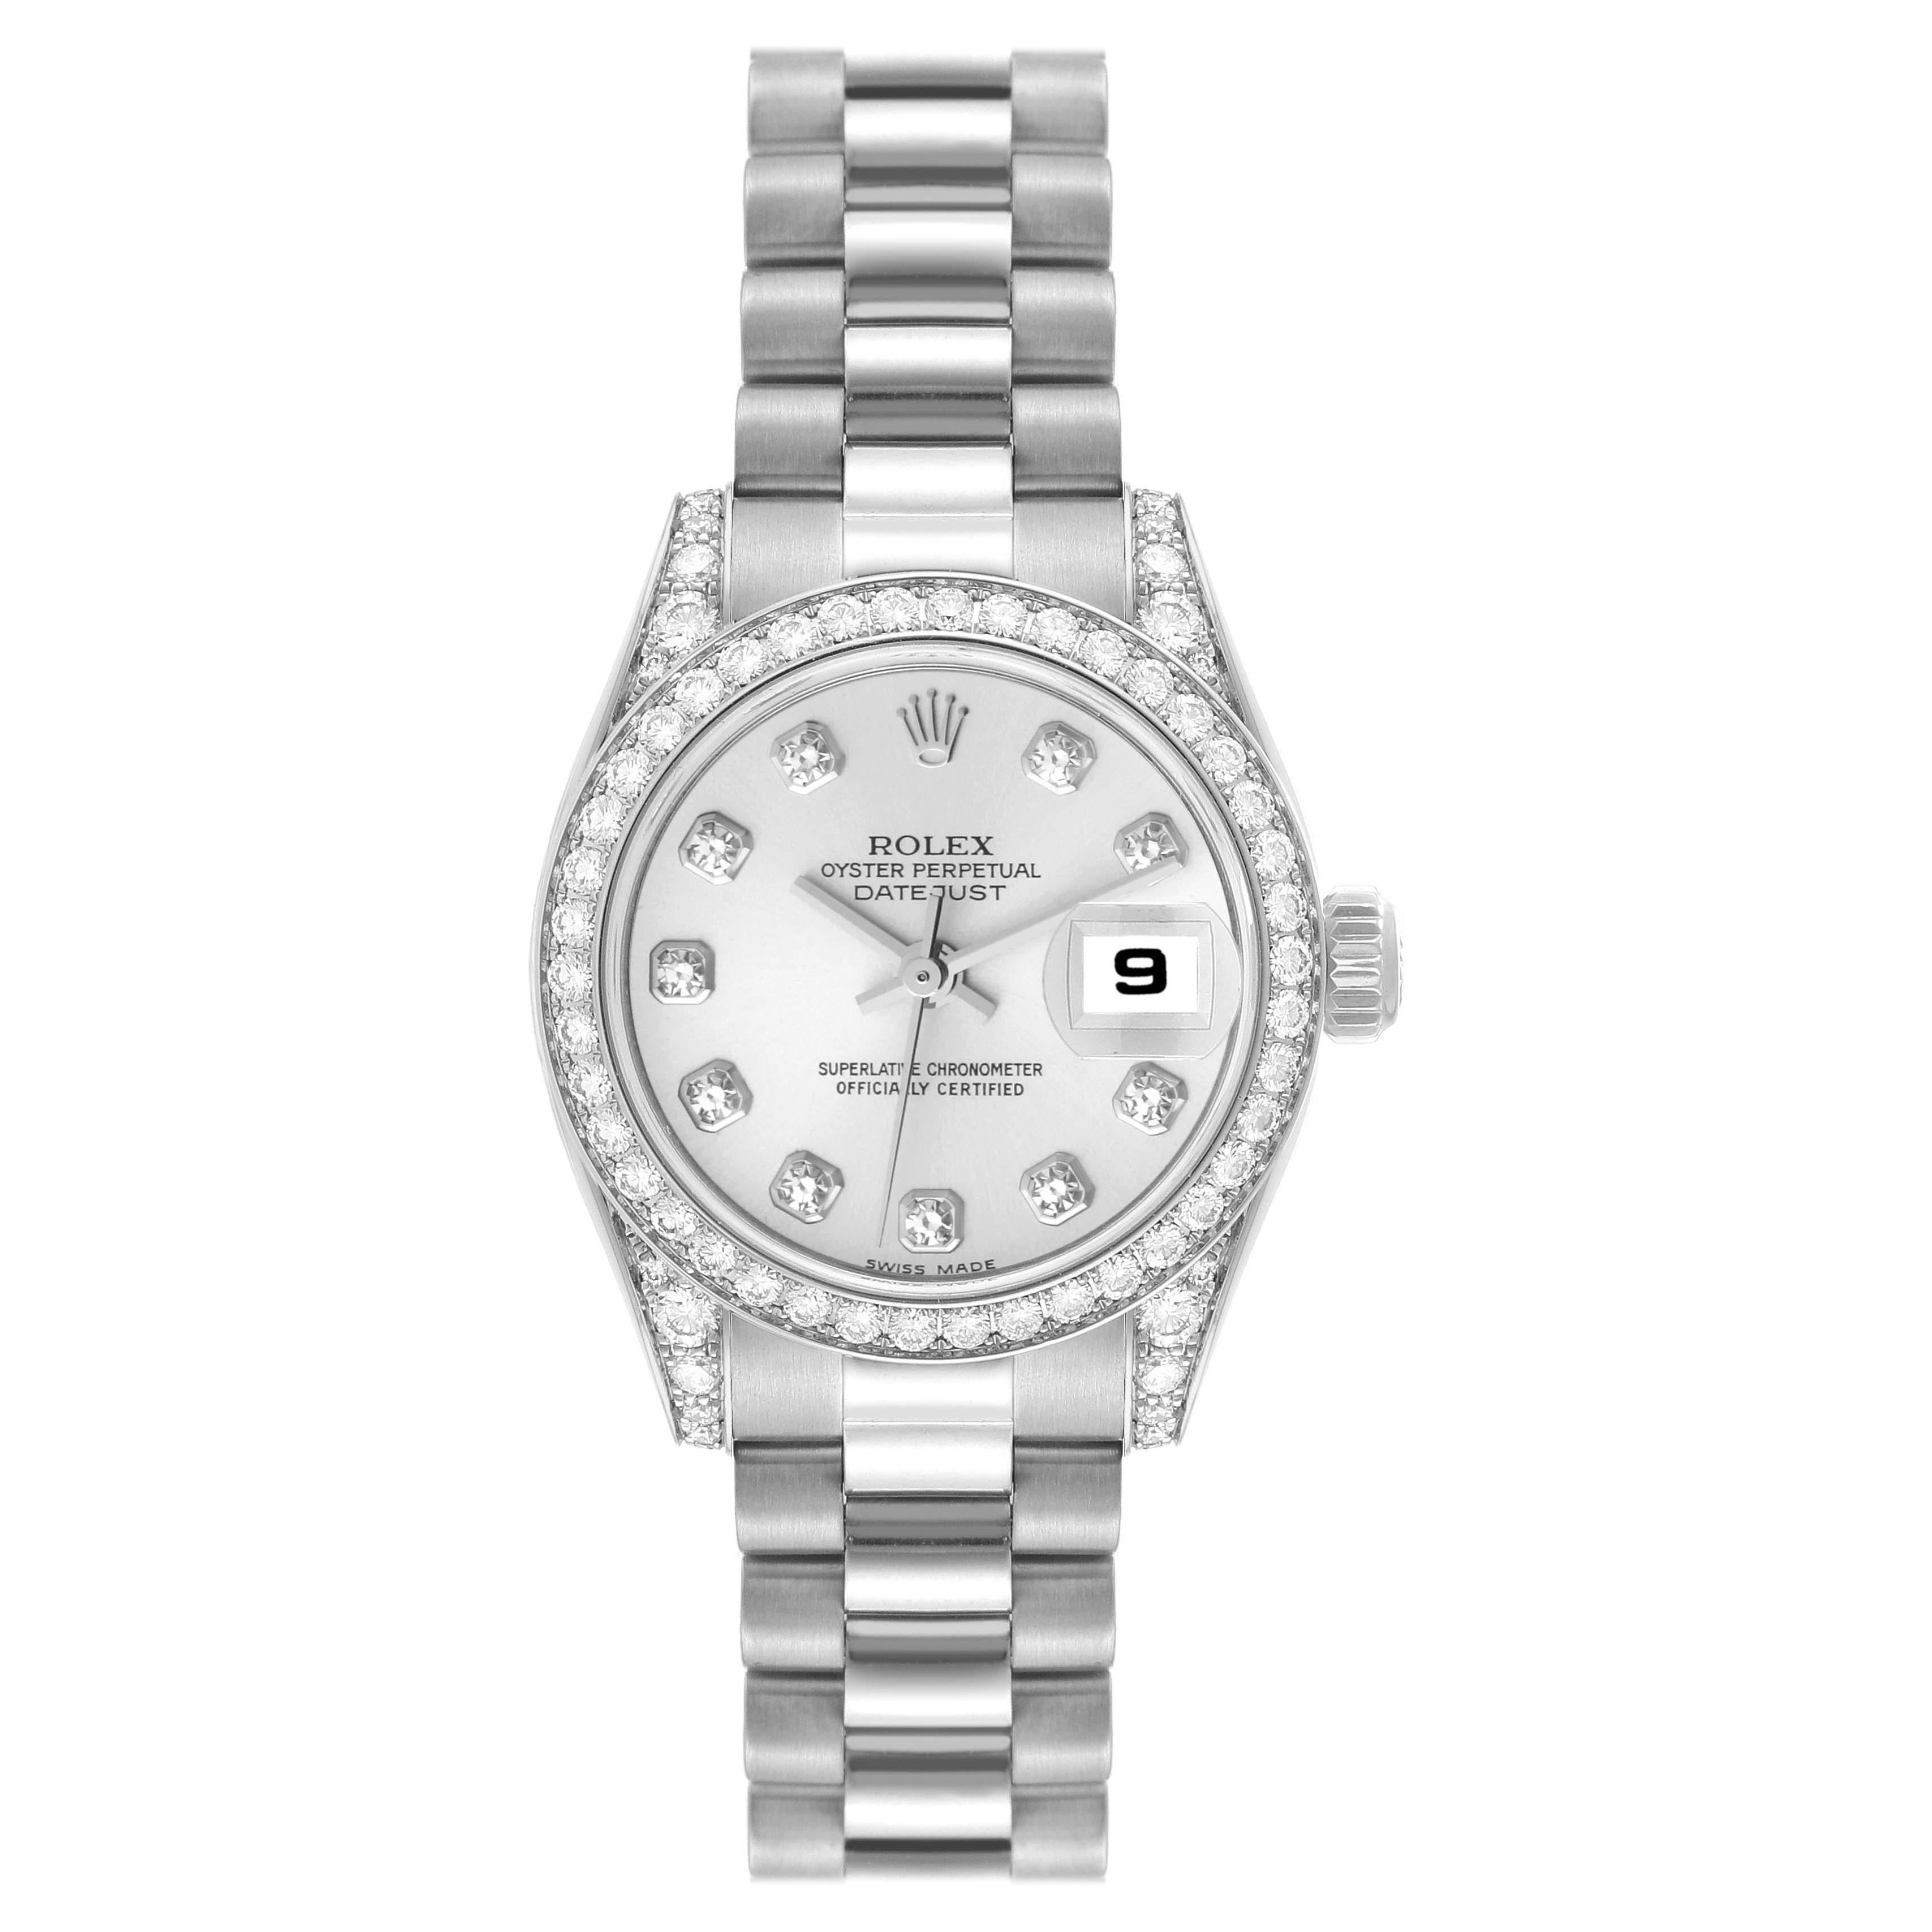 Rolex Datejust President White Gold Diamond Bezel Ladies Watch 179159 Box Papers For Sale